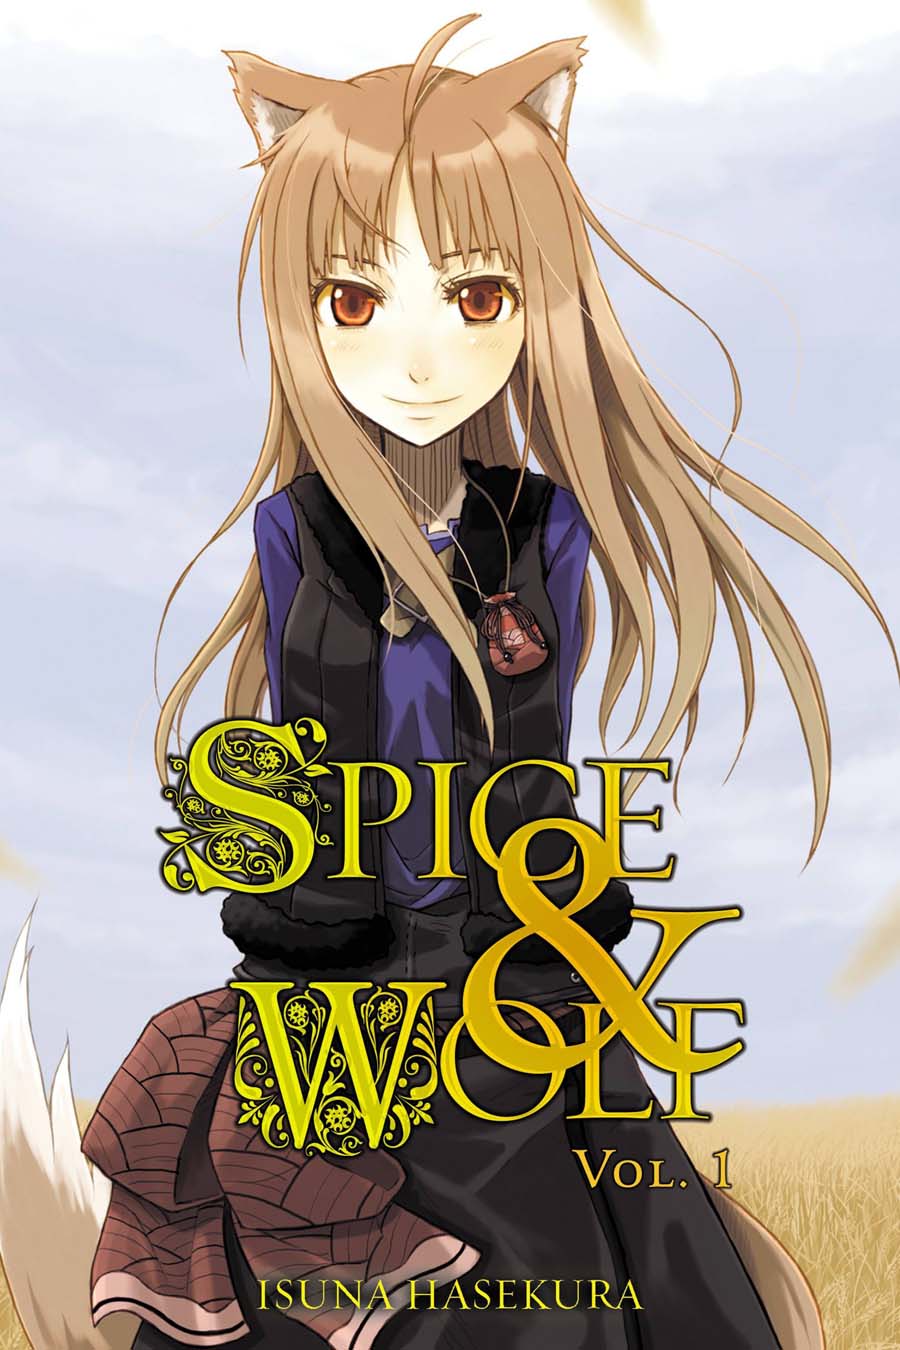 spice-wolf-cover1.jpg